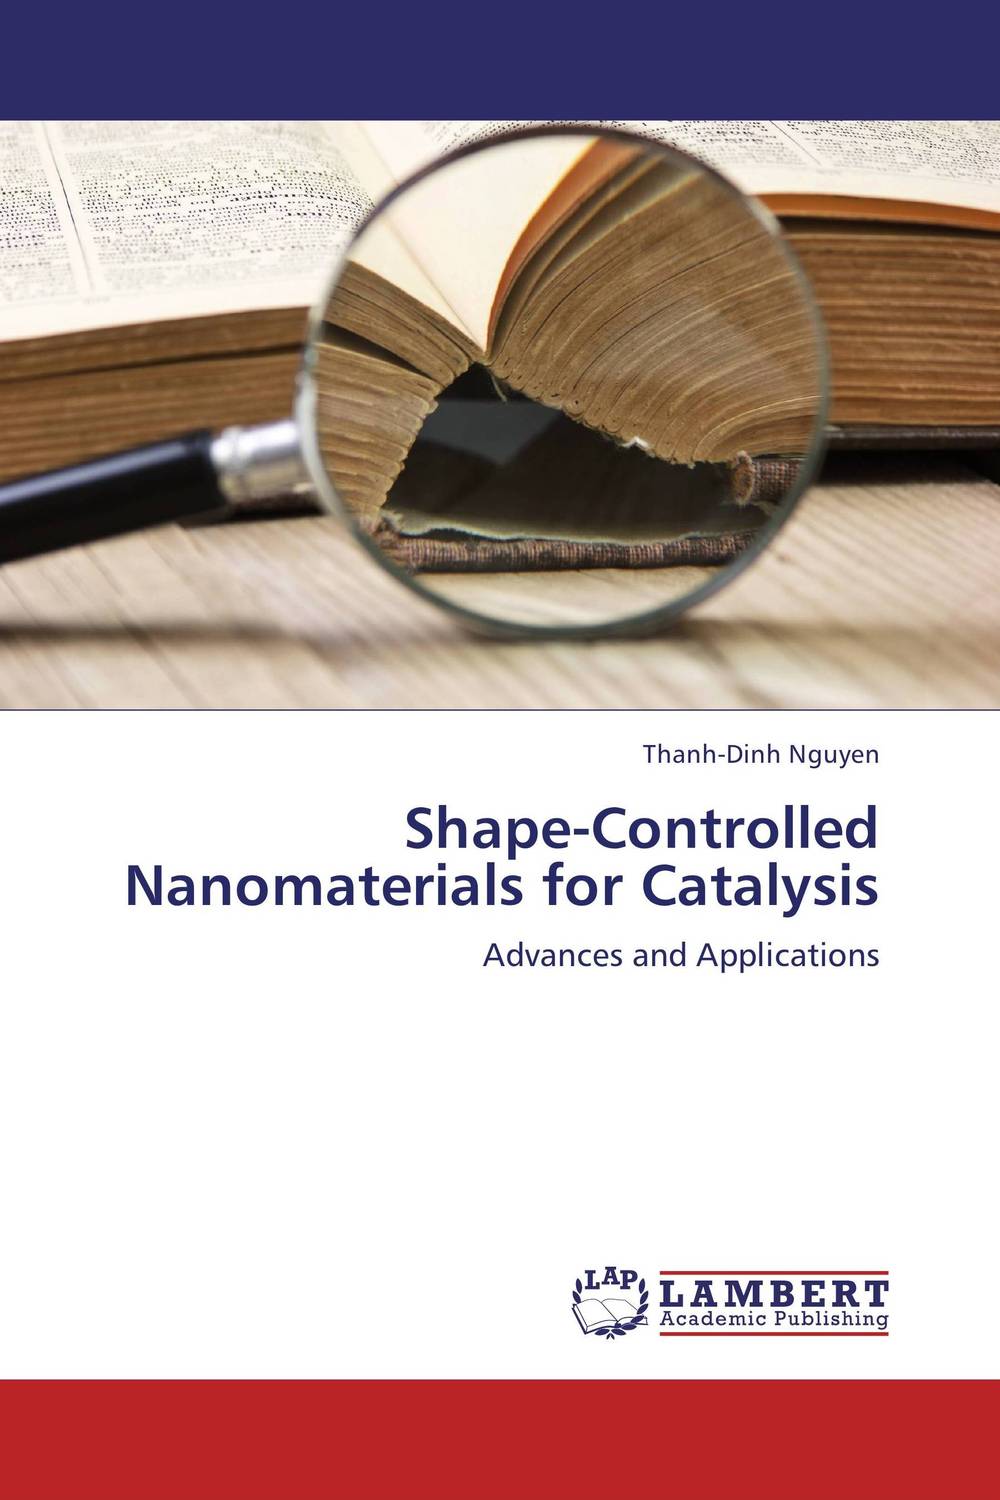 Shape-Controlled Nanomaterials for Catalysis